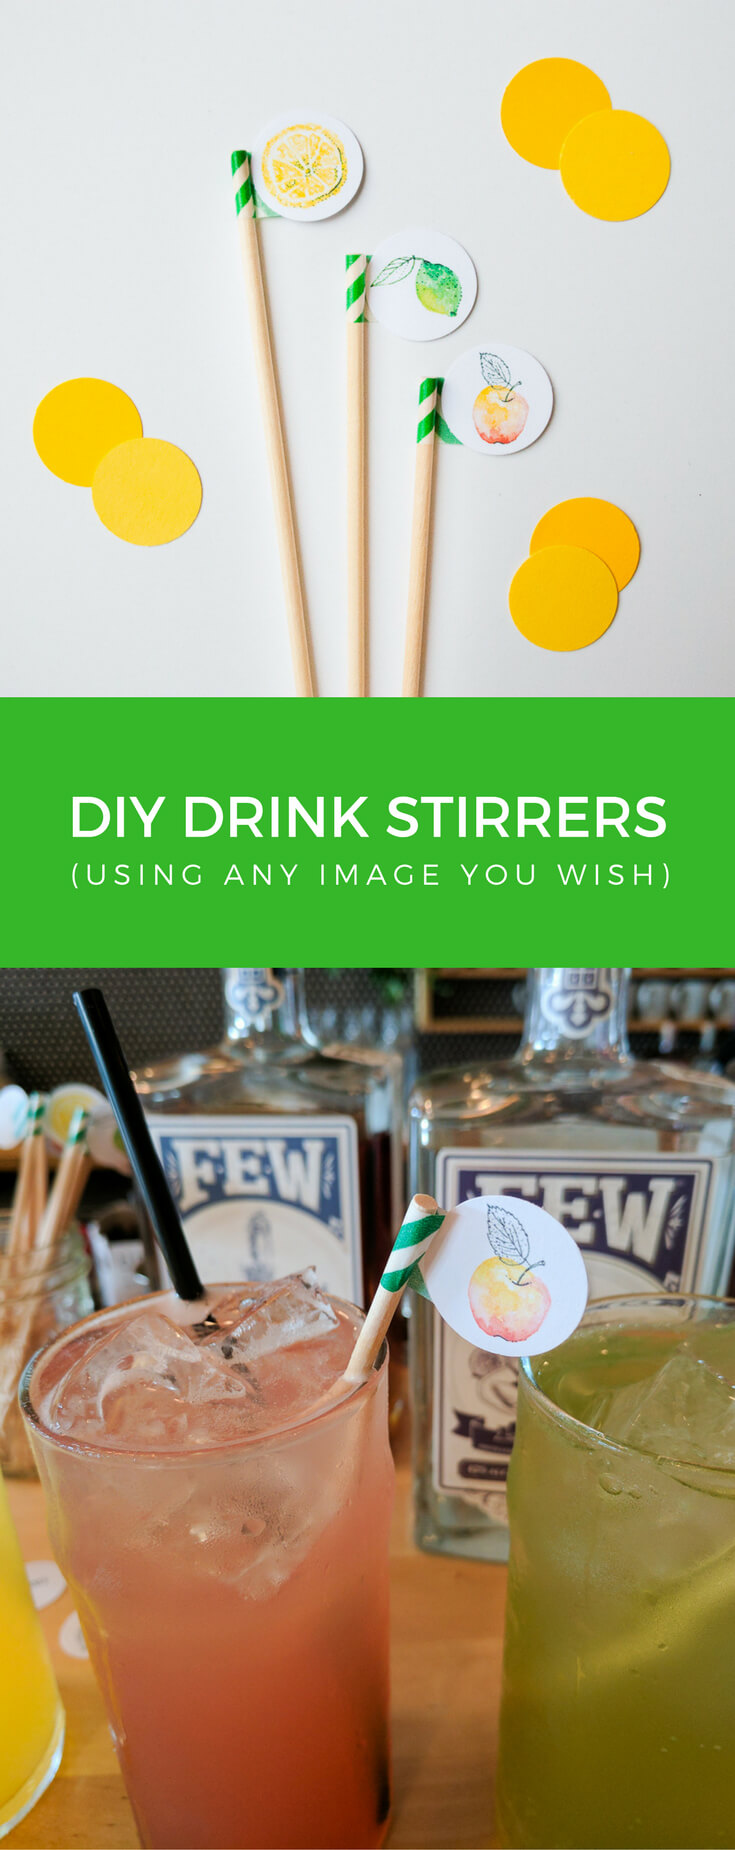 Easy DIY drink stirrers. Personalize them with your own image or words. Just print, punch, and attach to wood stirrers using washi tape. Make a whole bunch in just one night! #drinkstirrers #diy #spon